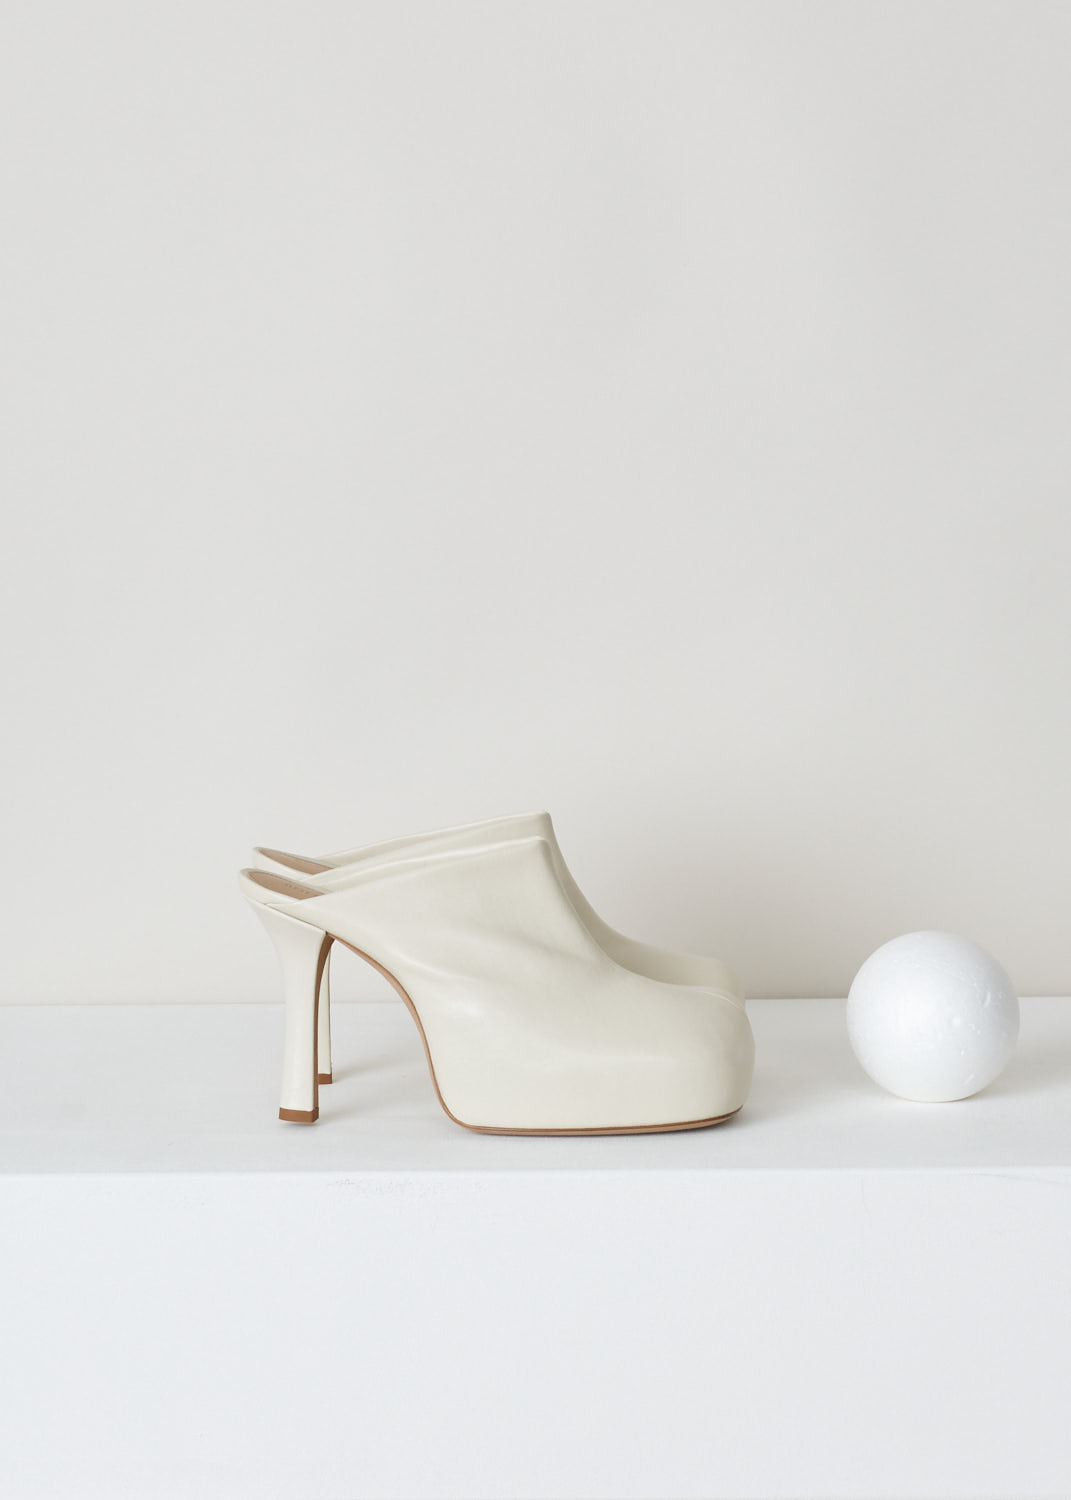 Bottega Veneta, Cream colored square cut platform mules, 630148_VBP40_8279_stretch_nappa_lambskin, white, side, Lovely lambskin mules sat on top a platform to give you more height. Featuring square cut toes in stretchy lambskin leather makes this model very comfy to walk on. furthermore this model is has leather lining sole and uppers. 

Heel Height: 11 cm / 4.3 inch. 